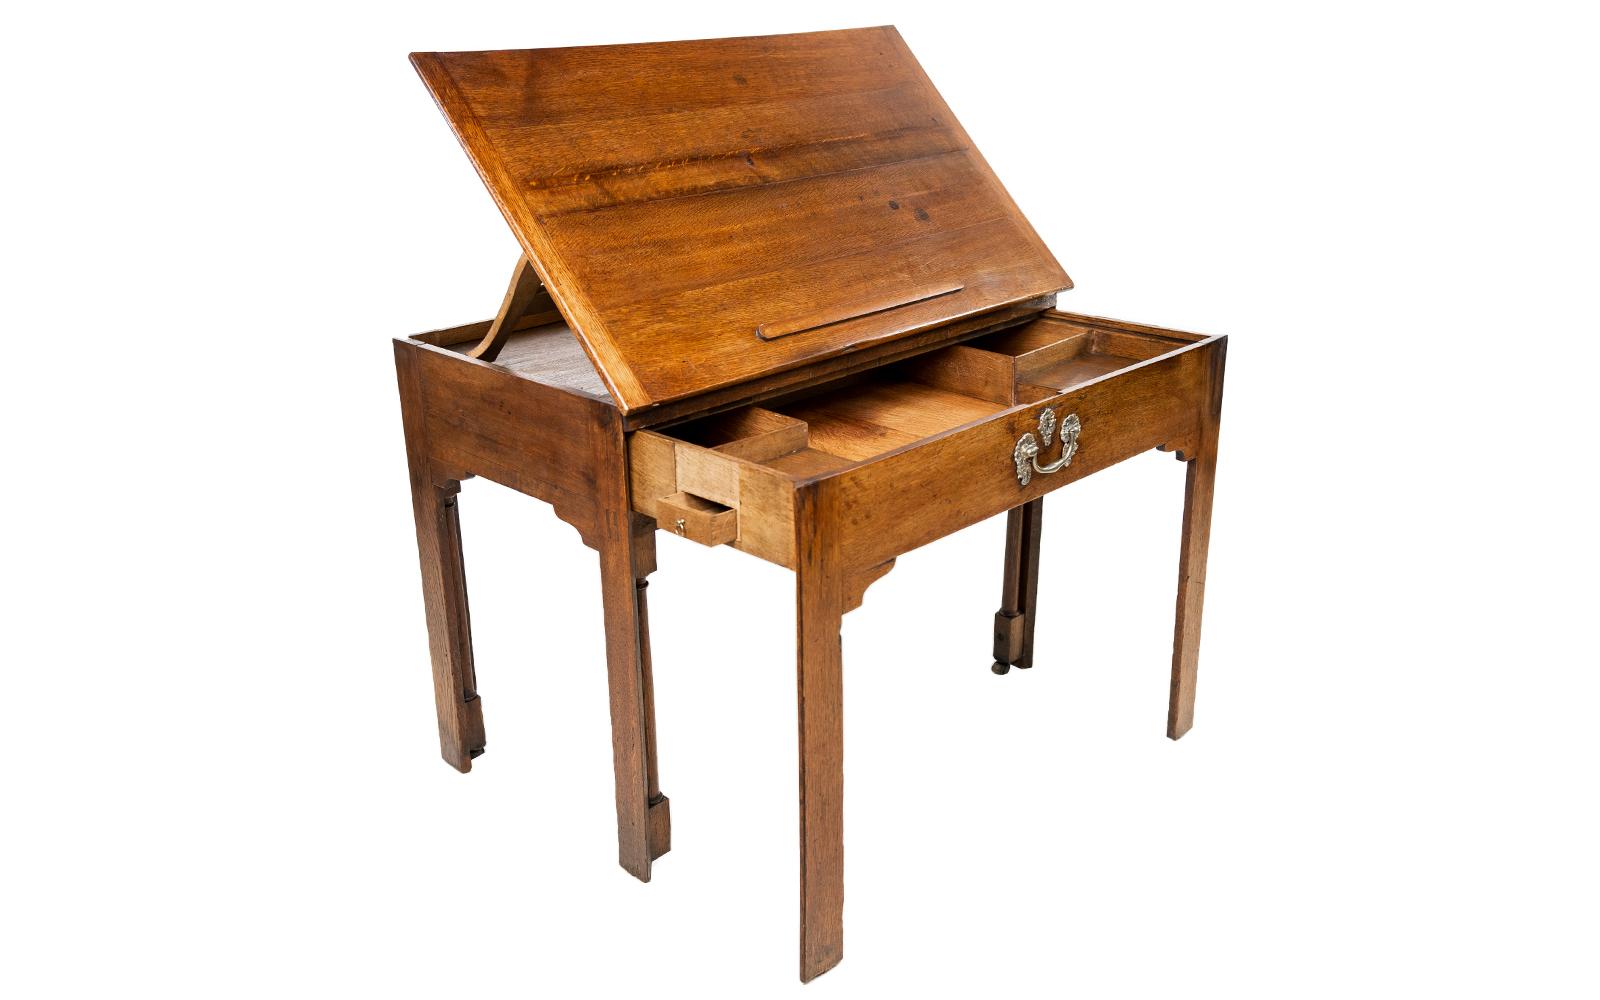 Architects drawing table

An oak adjustable drawing table or desk. The hinged top with easel support behind, the drawer extends forward on part of the cluster leg. A rare piece in superb original order.

The hinged top adjusts to various angles,